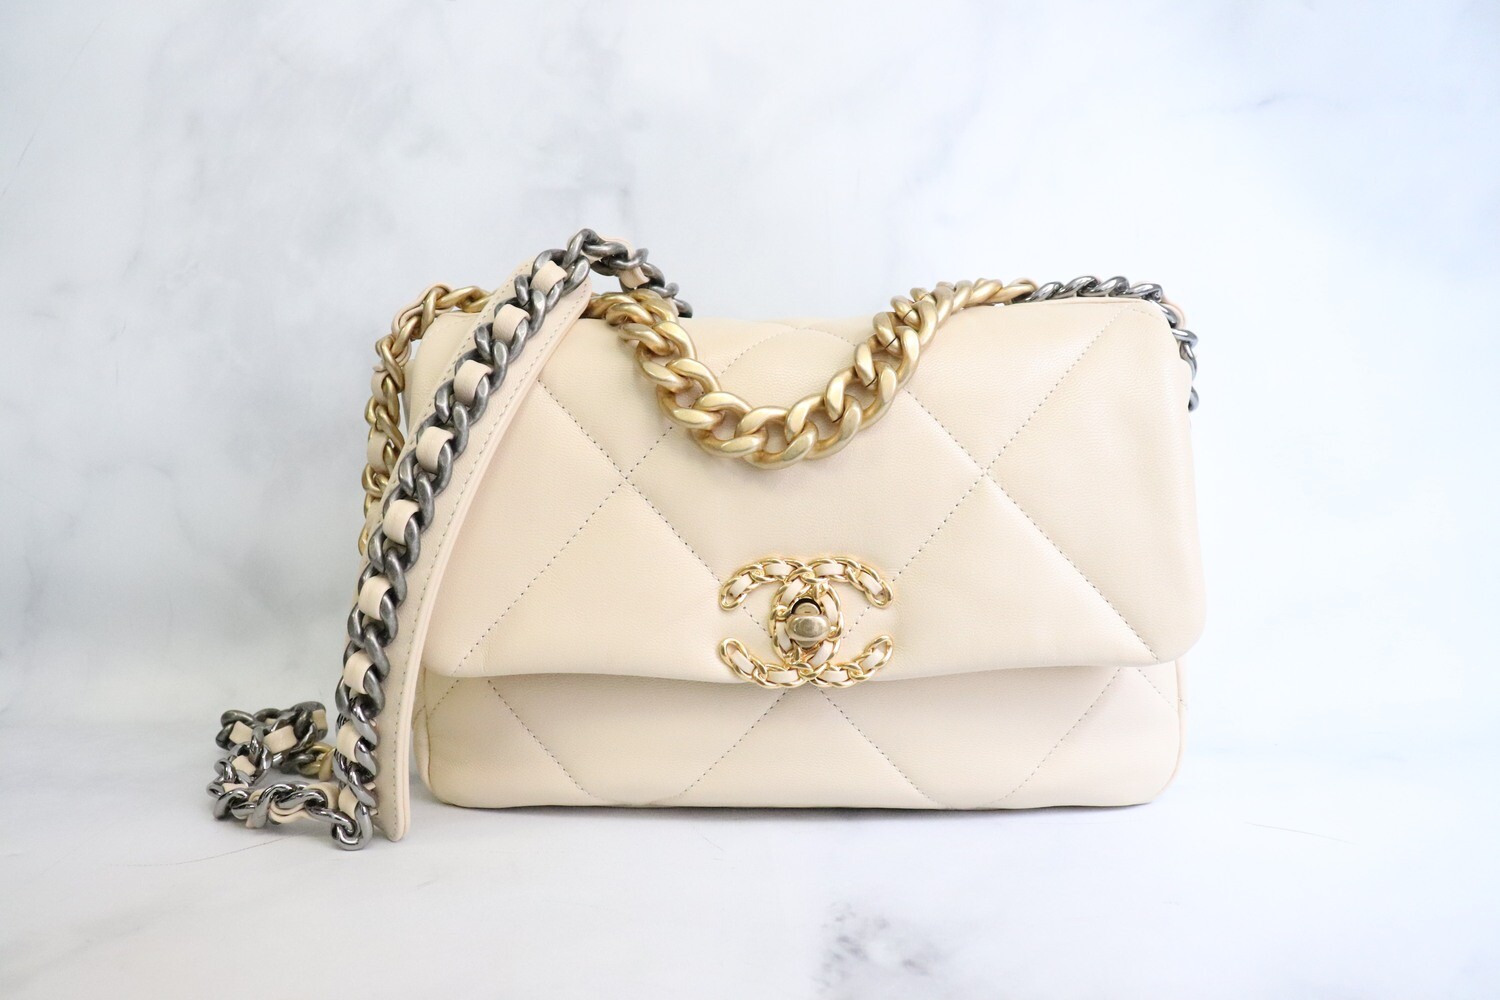 Chanel 19, Small, Beige Leather, Mixed Hardware, As New in Box